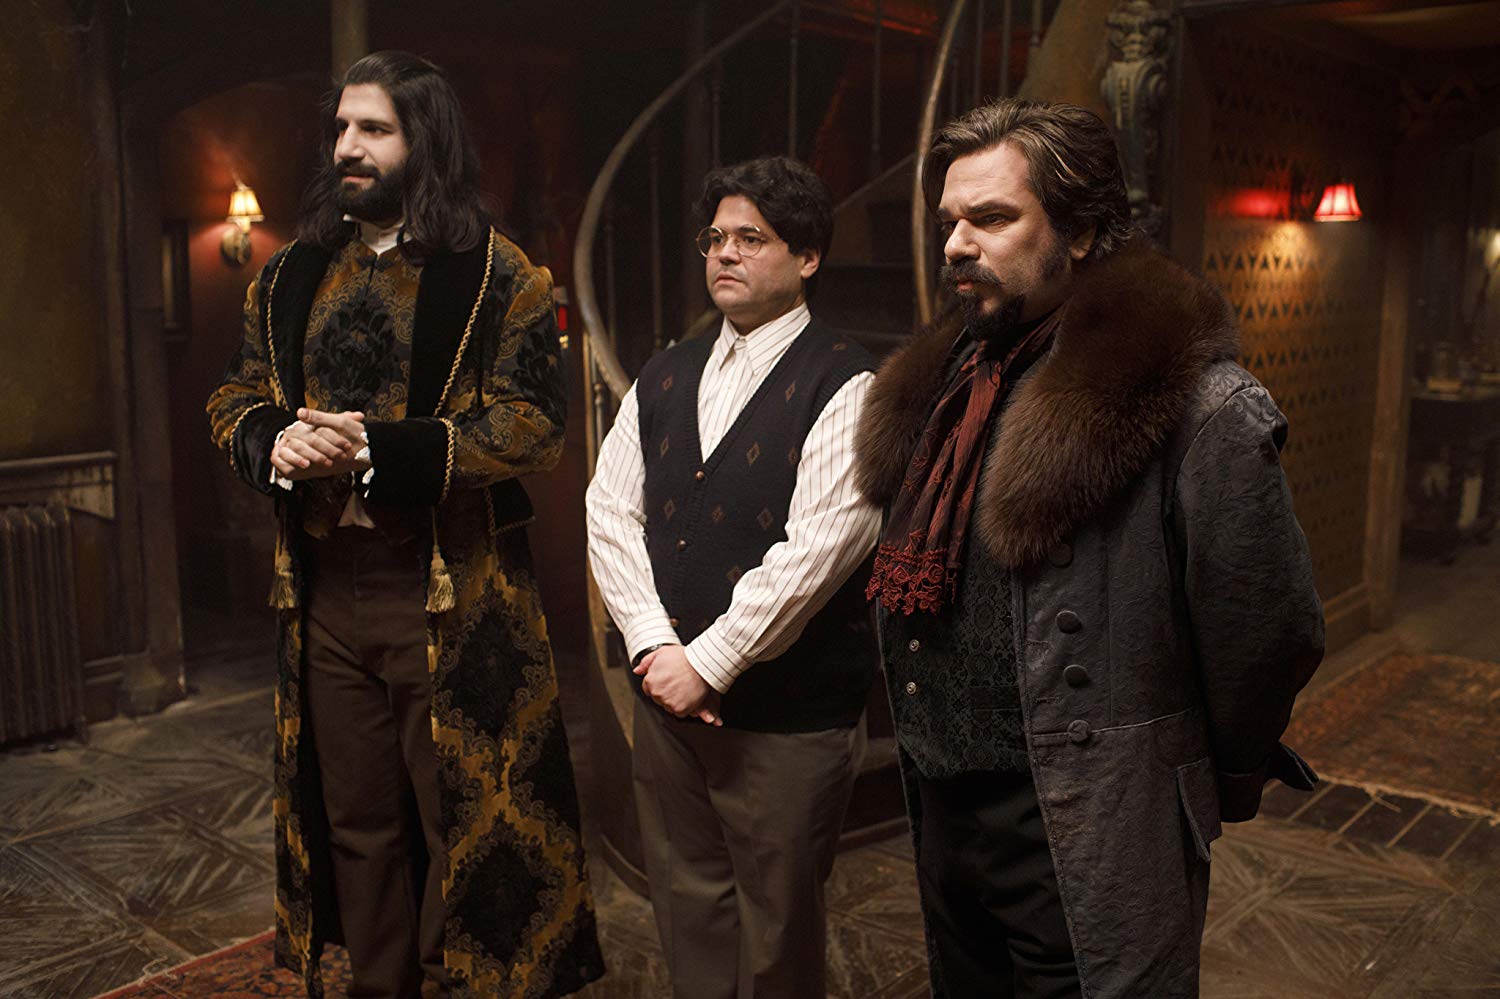 What we do in the shadows (2)